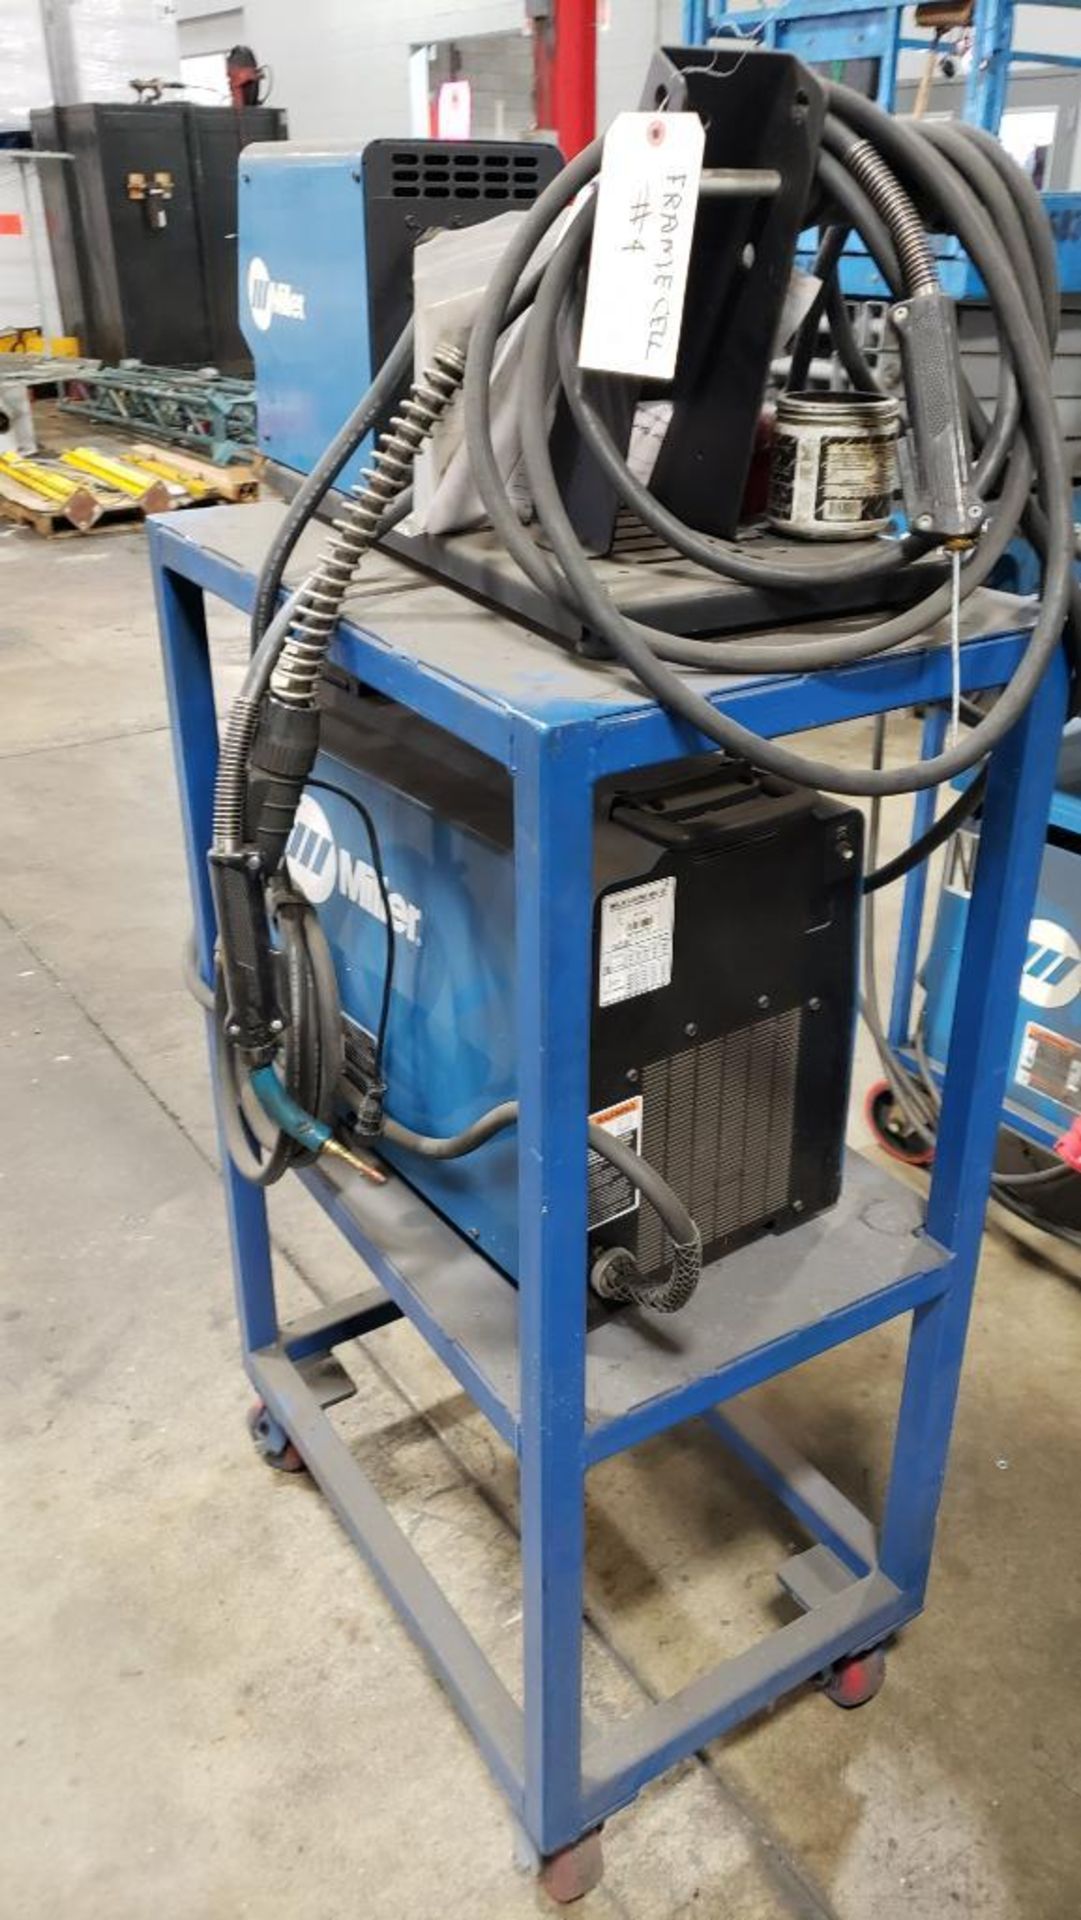 Miller Invision 352 MPa auto-line w/ Miller S-74 MPa Plus wire feeder welding system. - Image 15 of 15